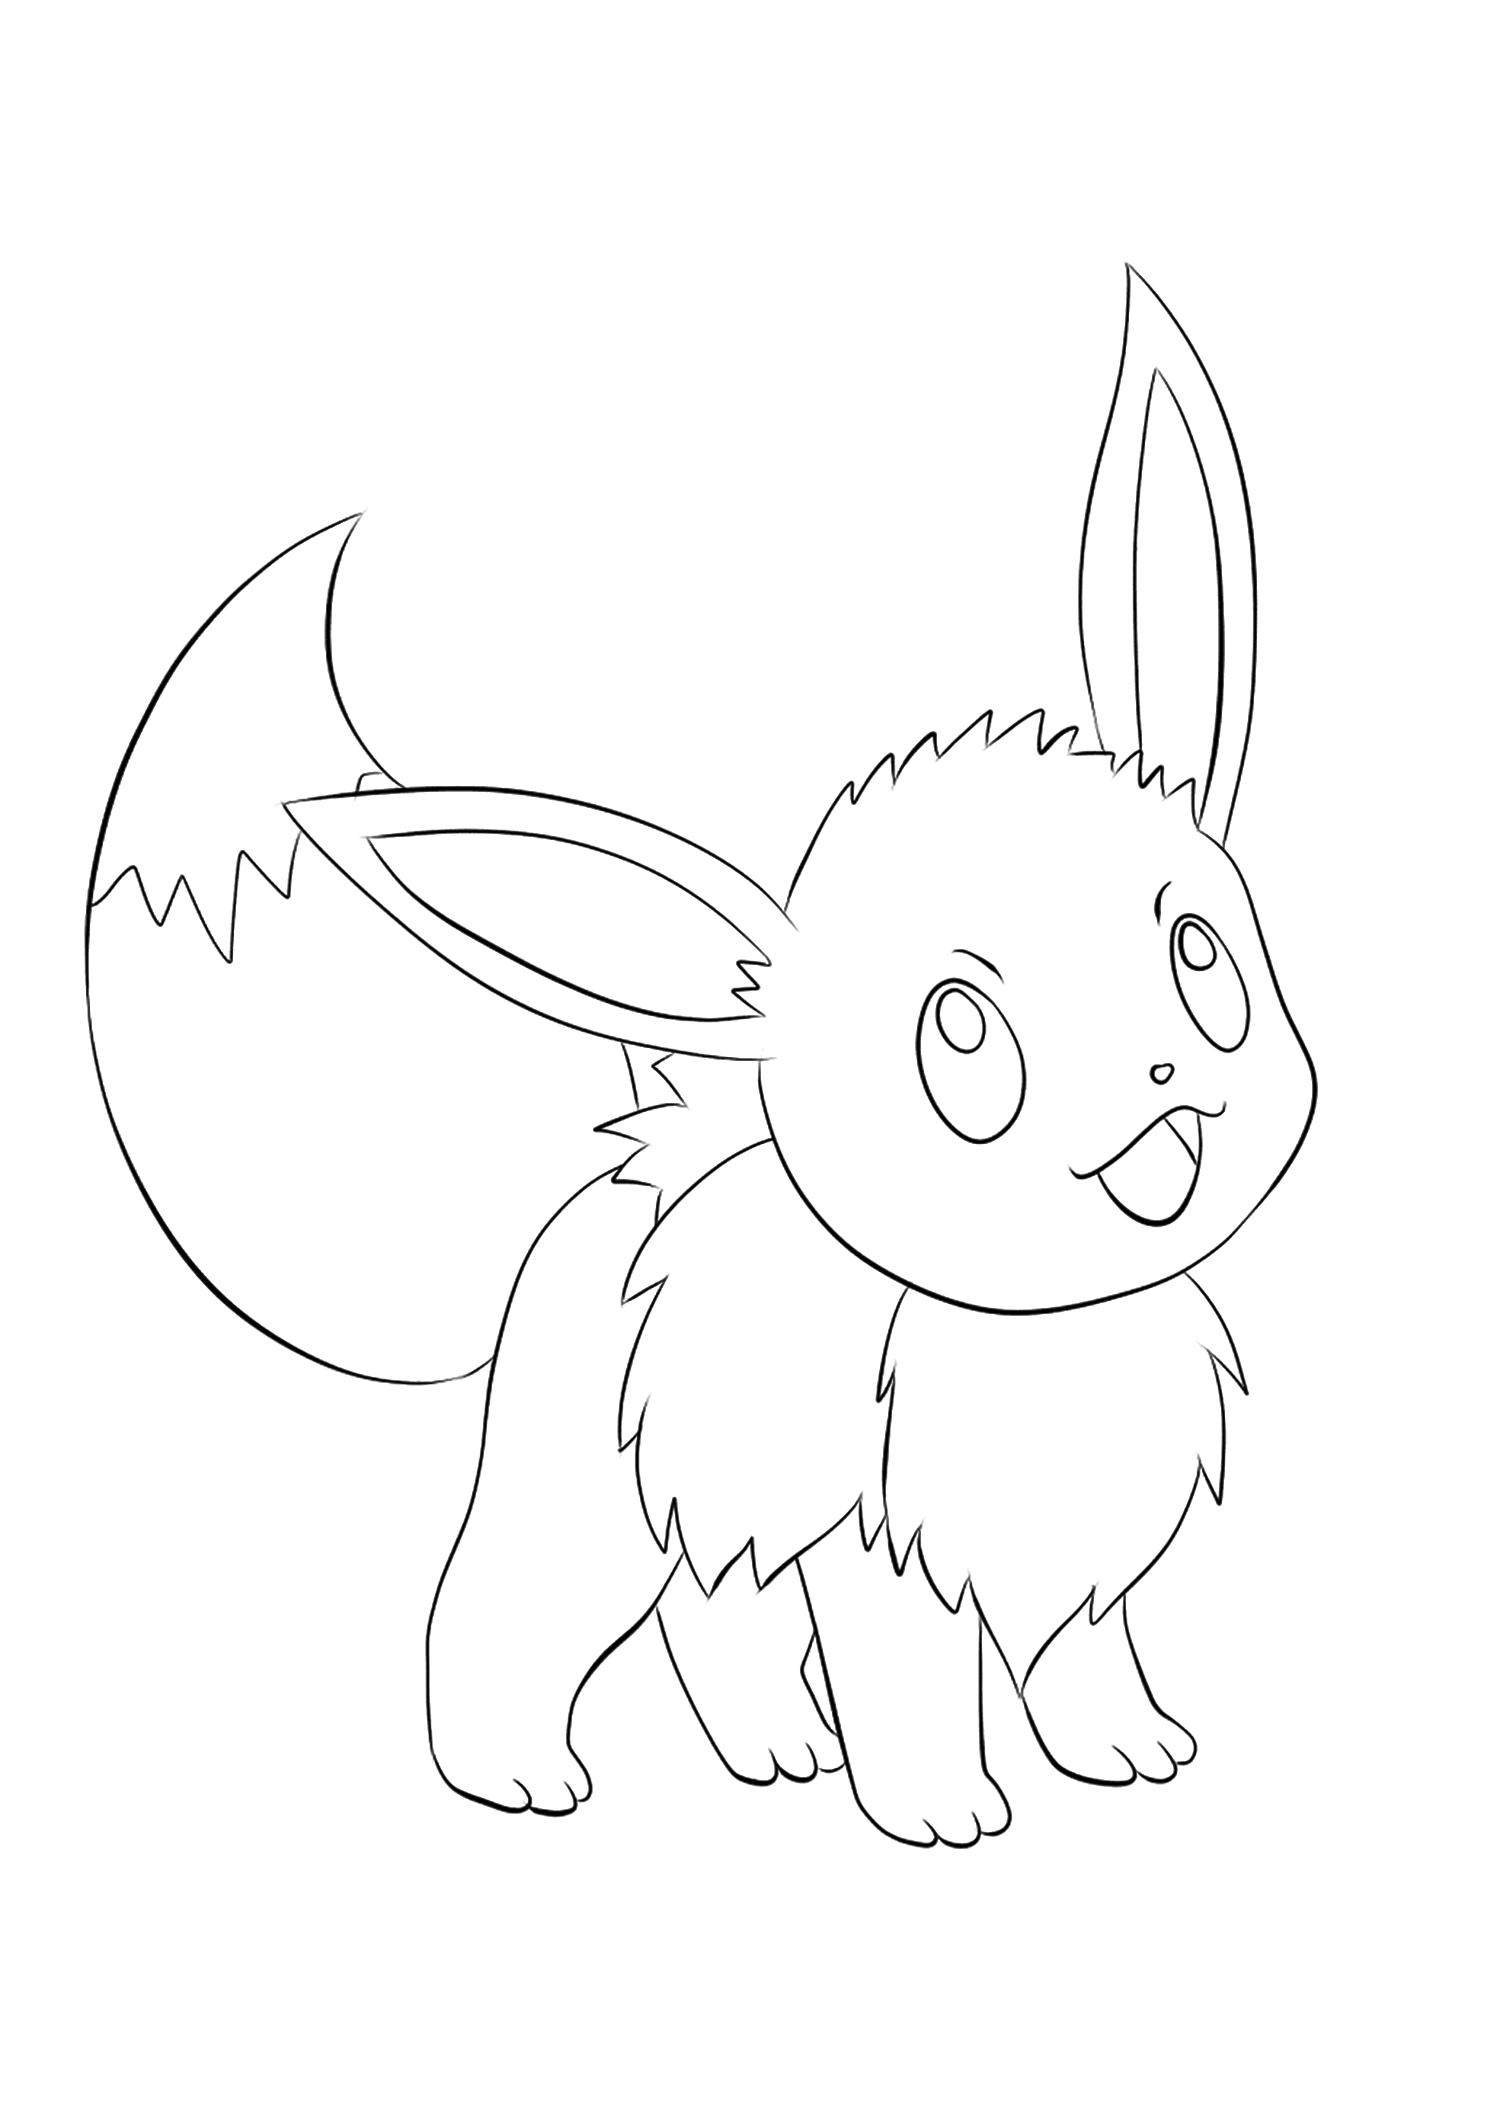 Eevee No.133 : Pokemon Generation I - All Pokemon coloring pages Kids Coloring  Pages